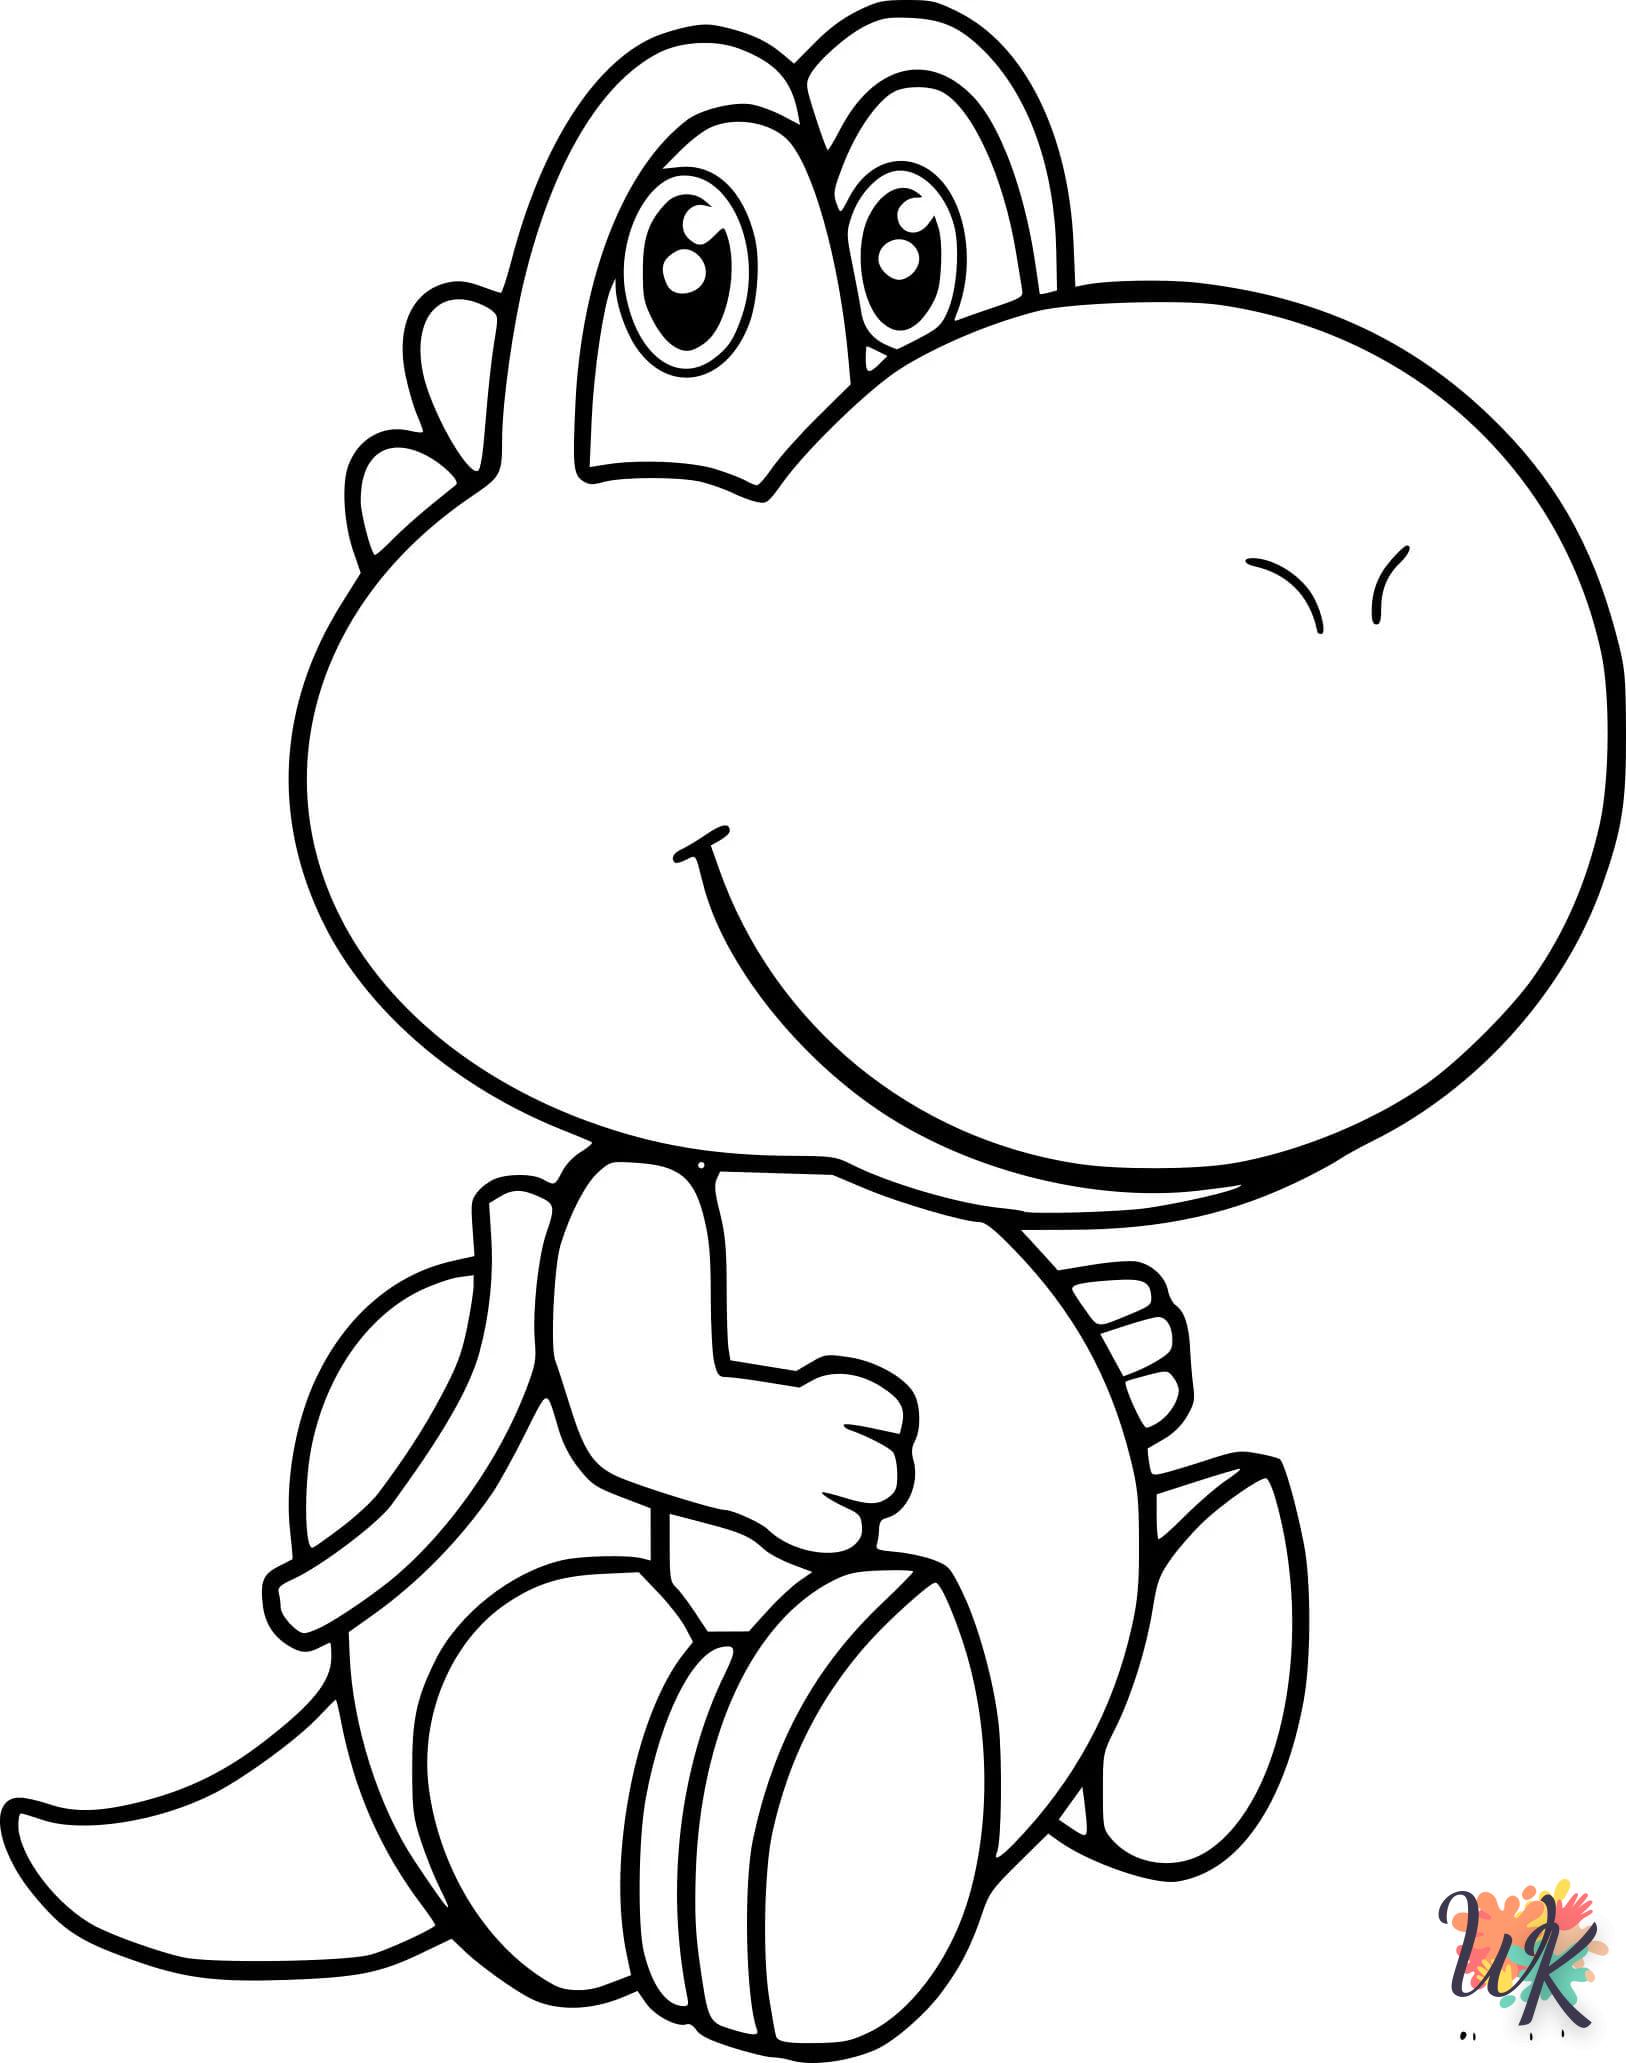 Yoshi coloring page to print for children aged 5